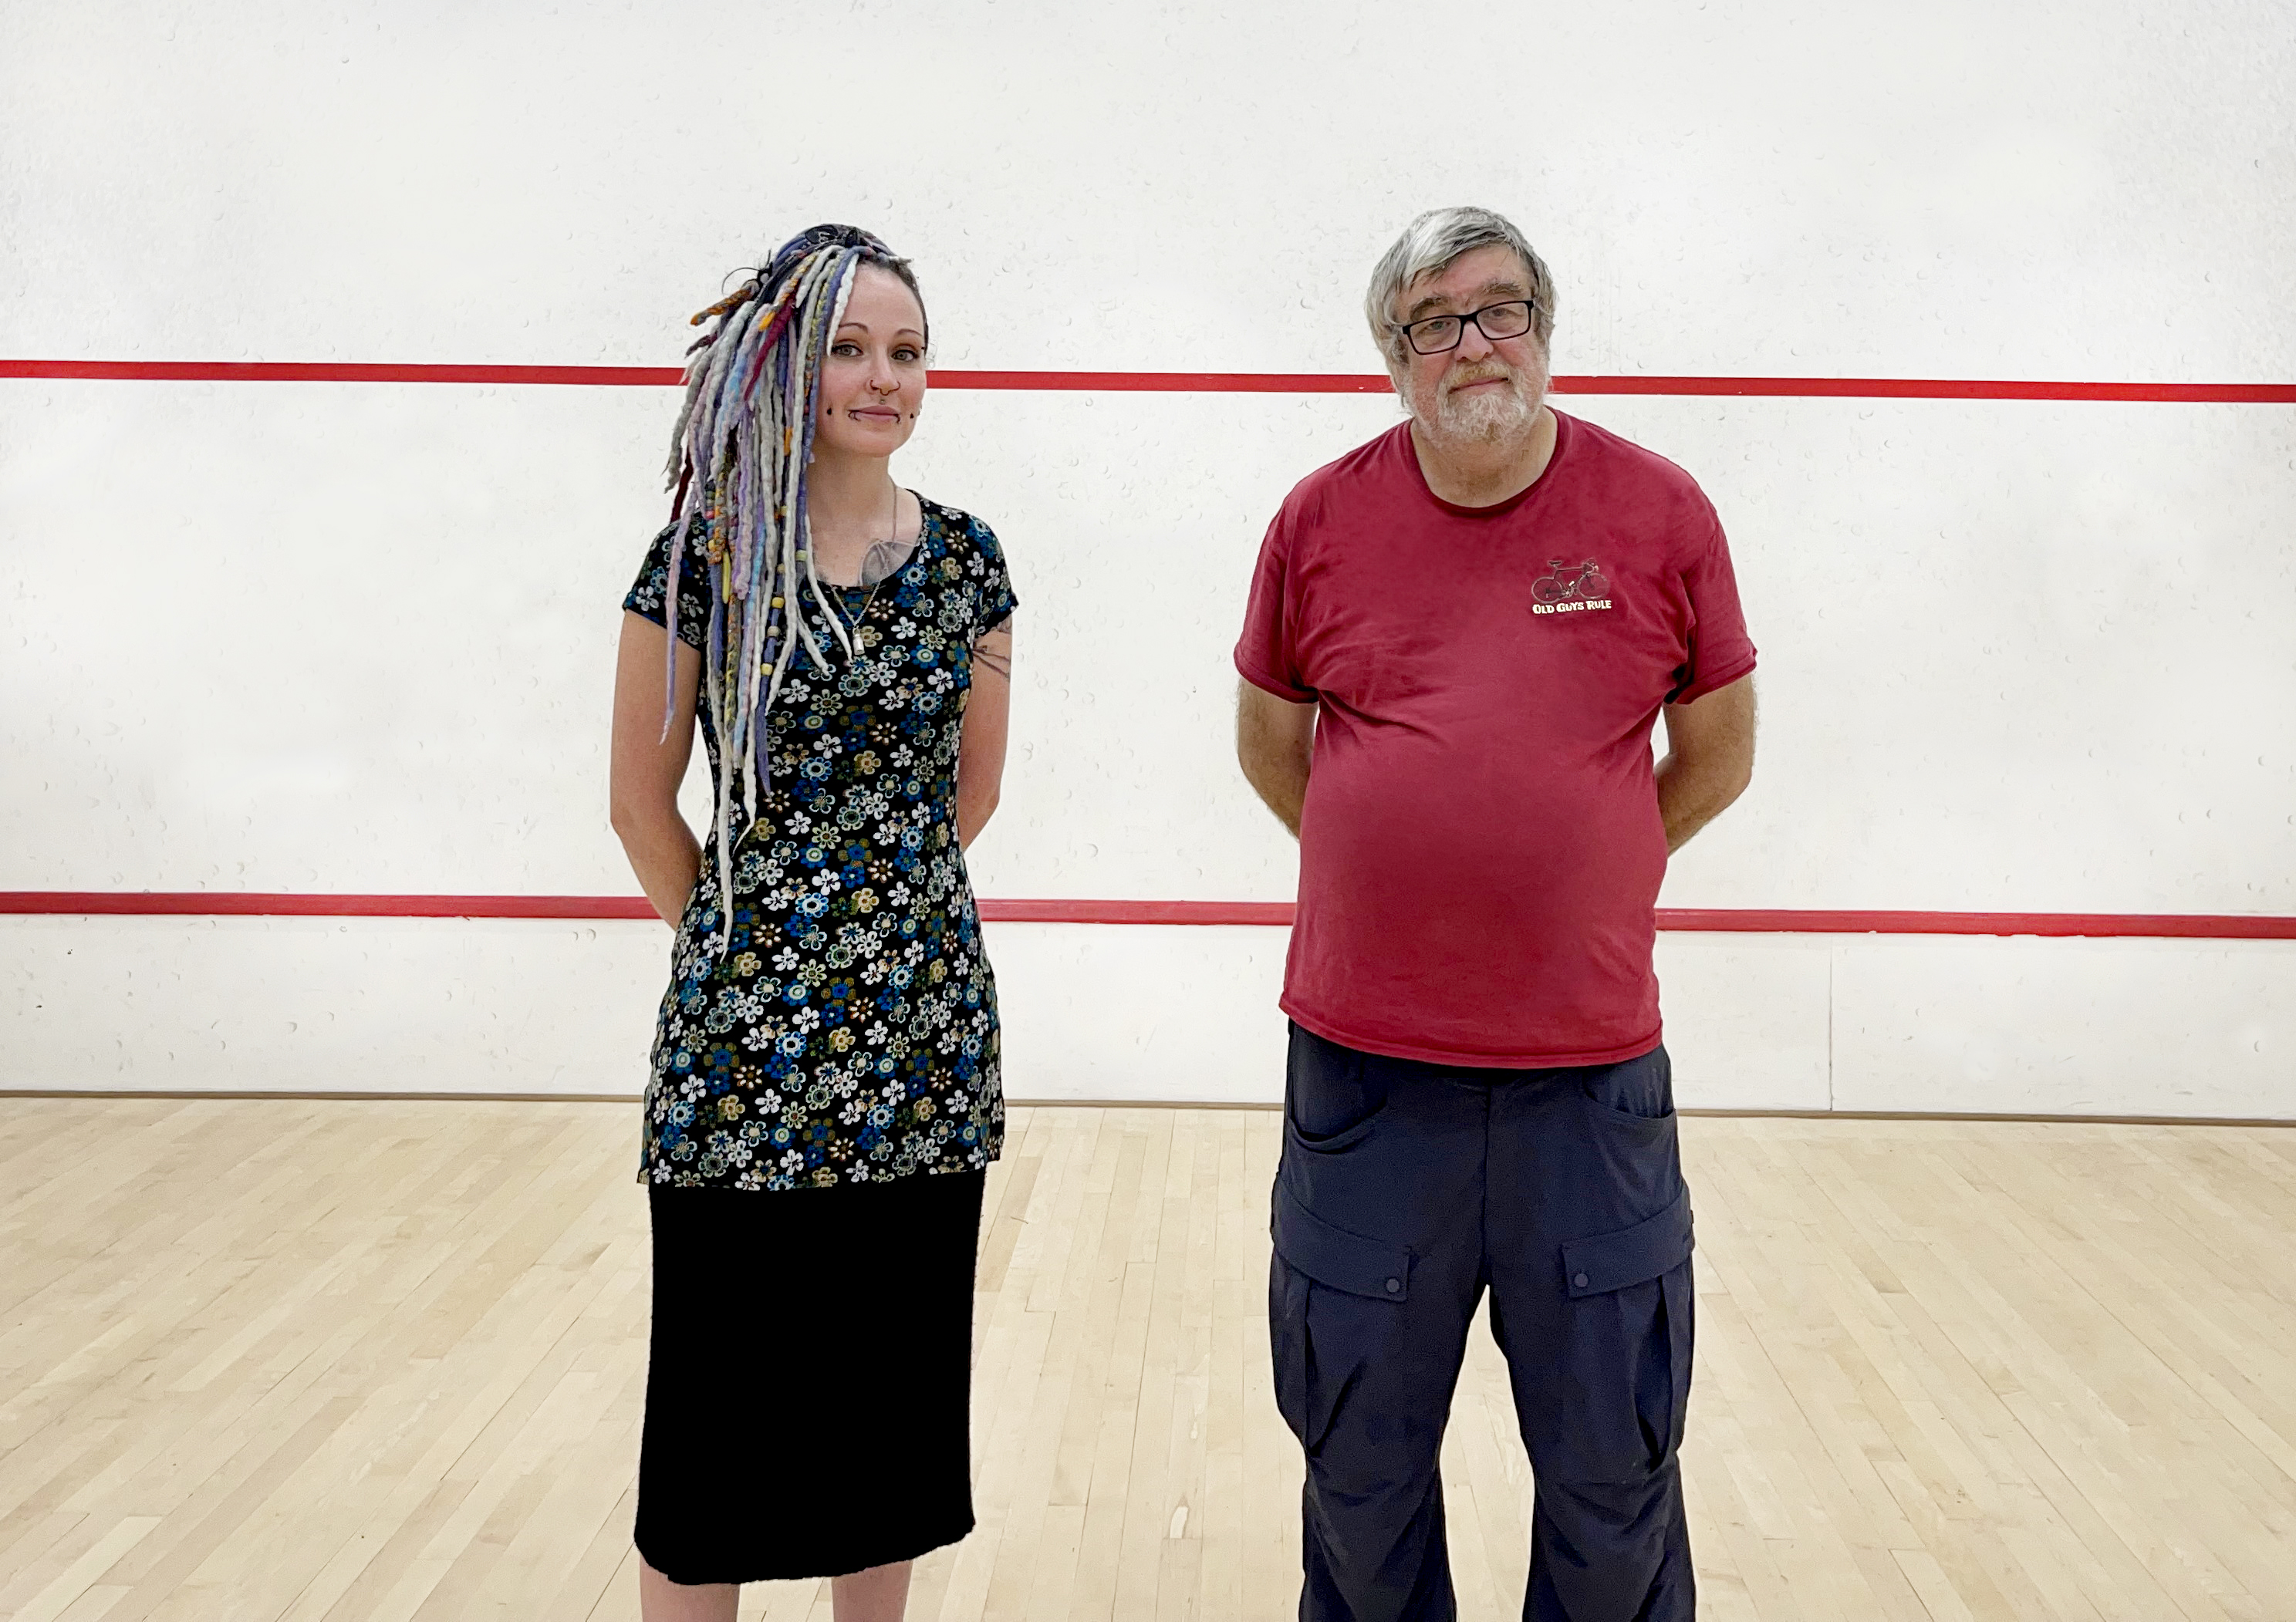 Cllrs Carter and Regester at Sudbury squash courts